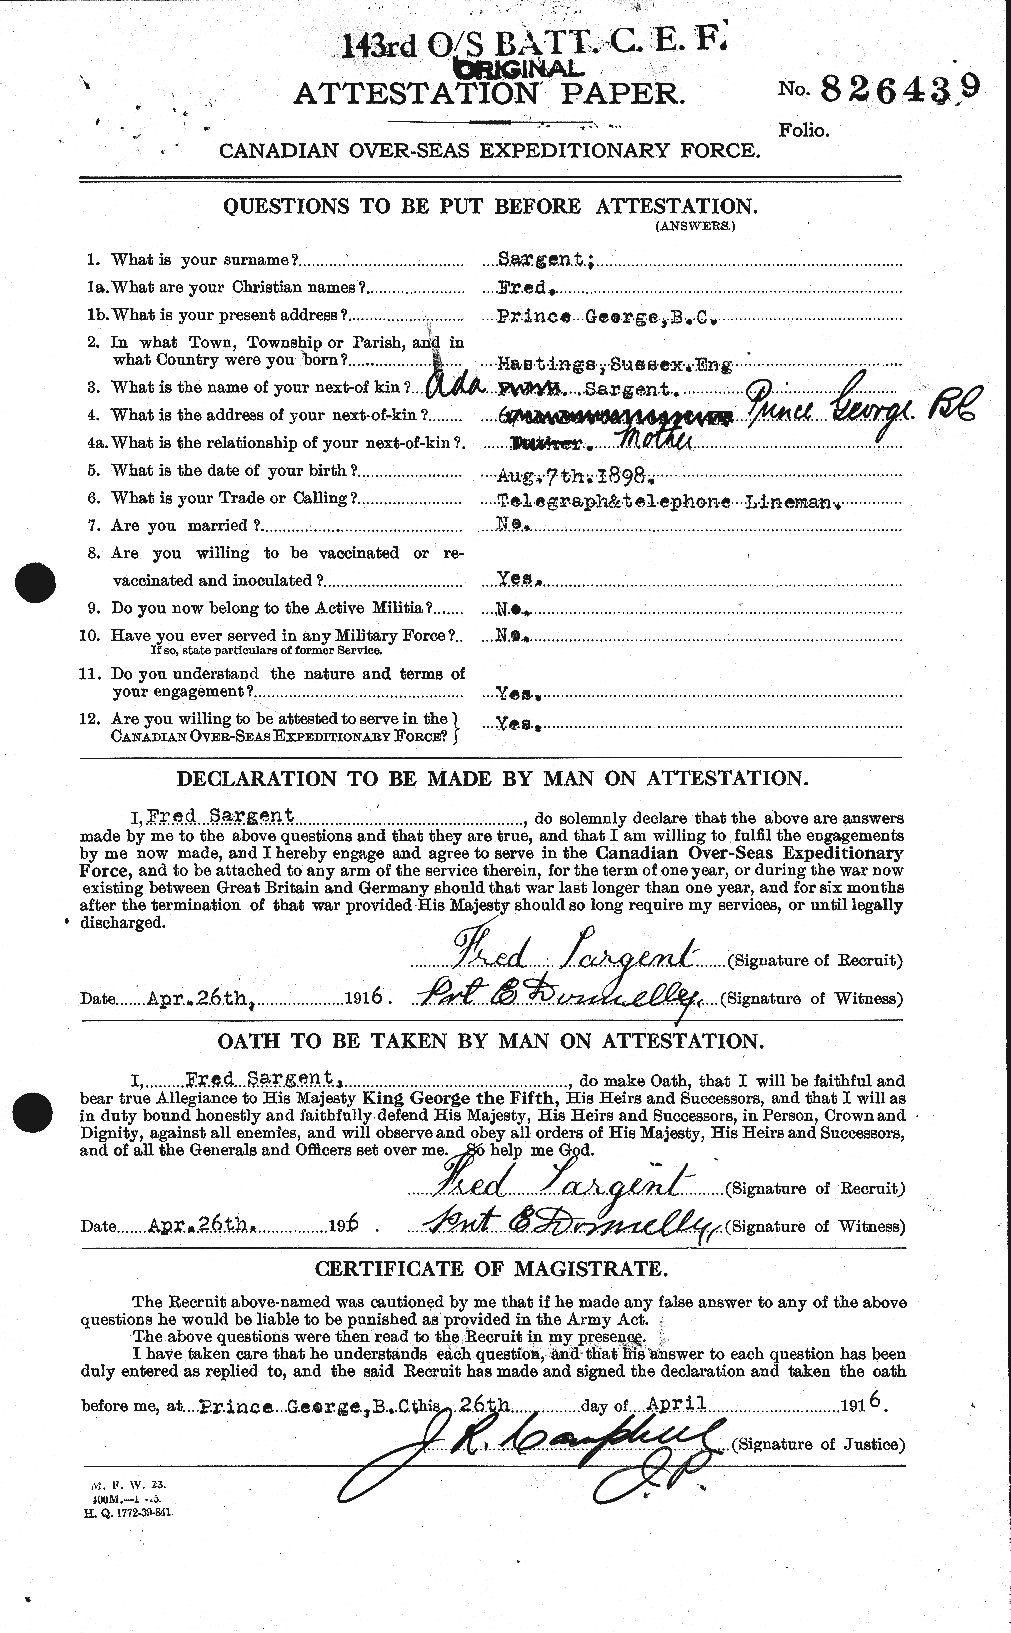 Personnel Records of the First World War - CEF 079157a